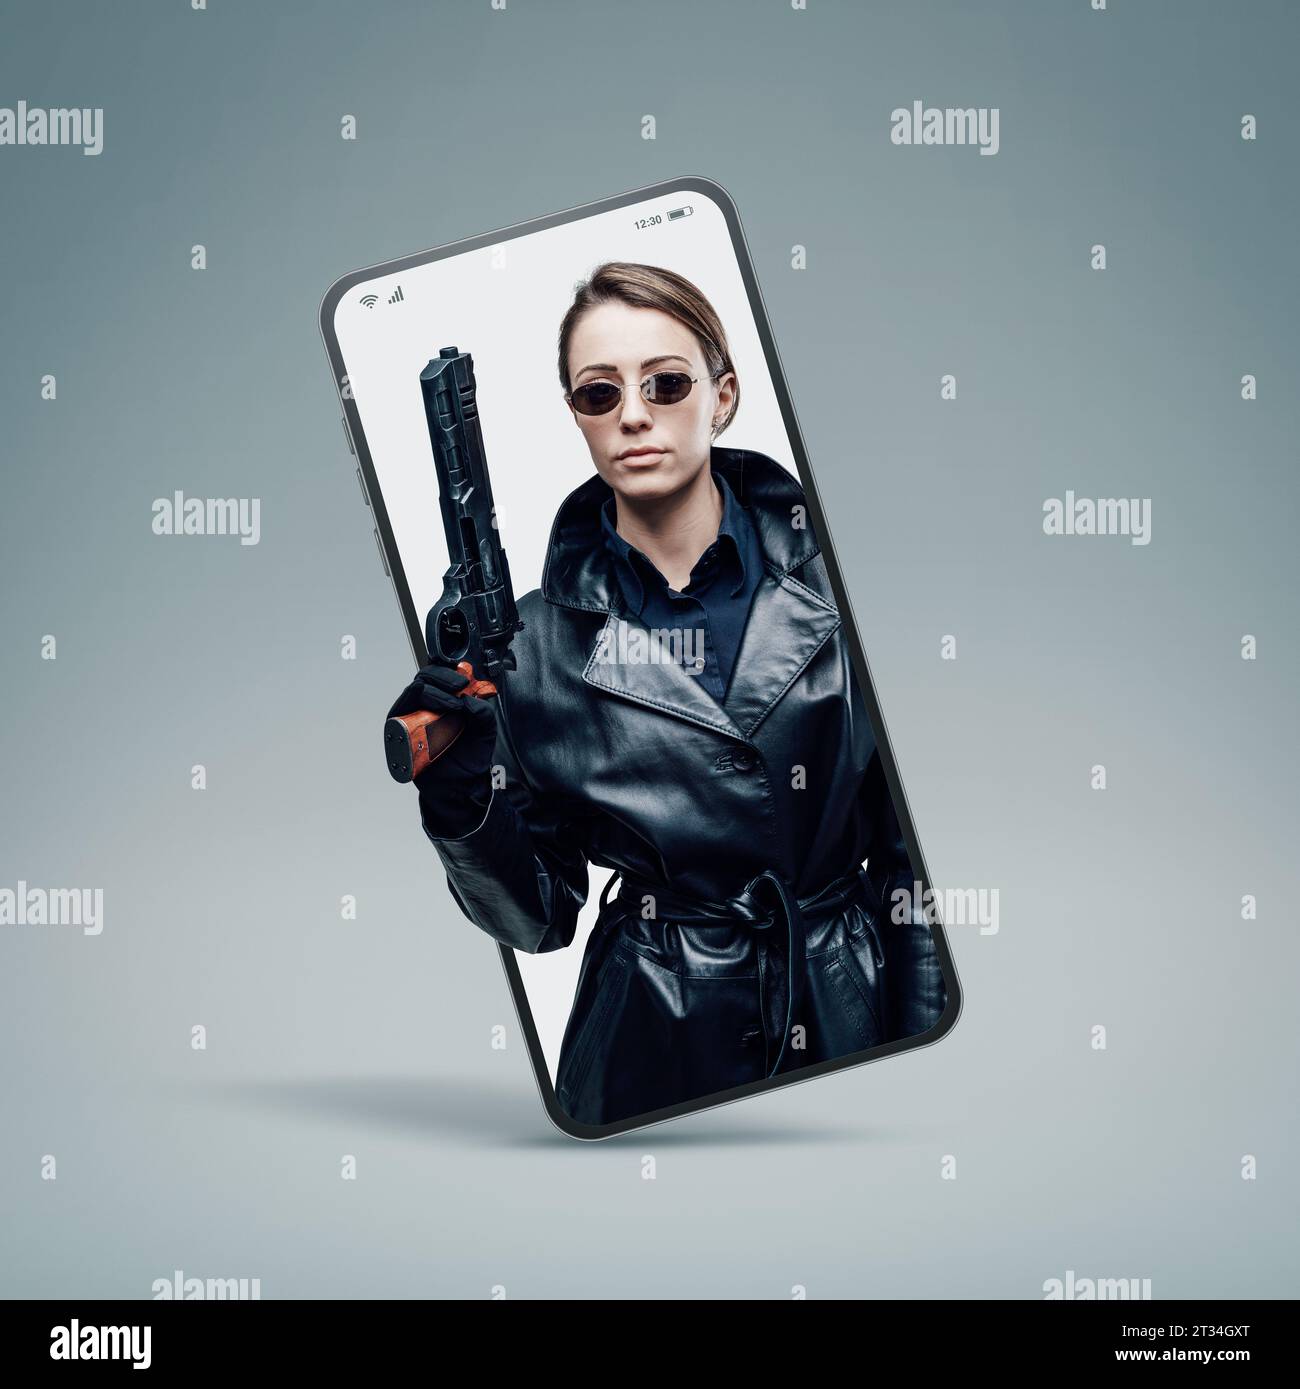 Cool female spy agent in black leather coat in a smartphone videocall Stock Photo